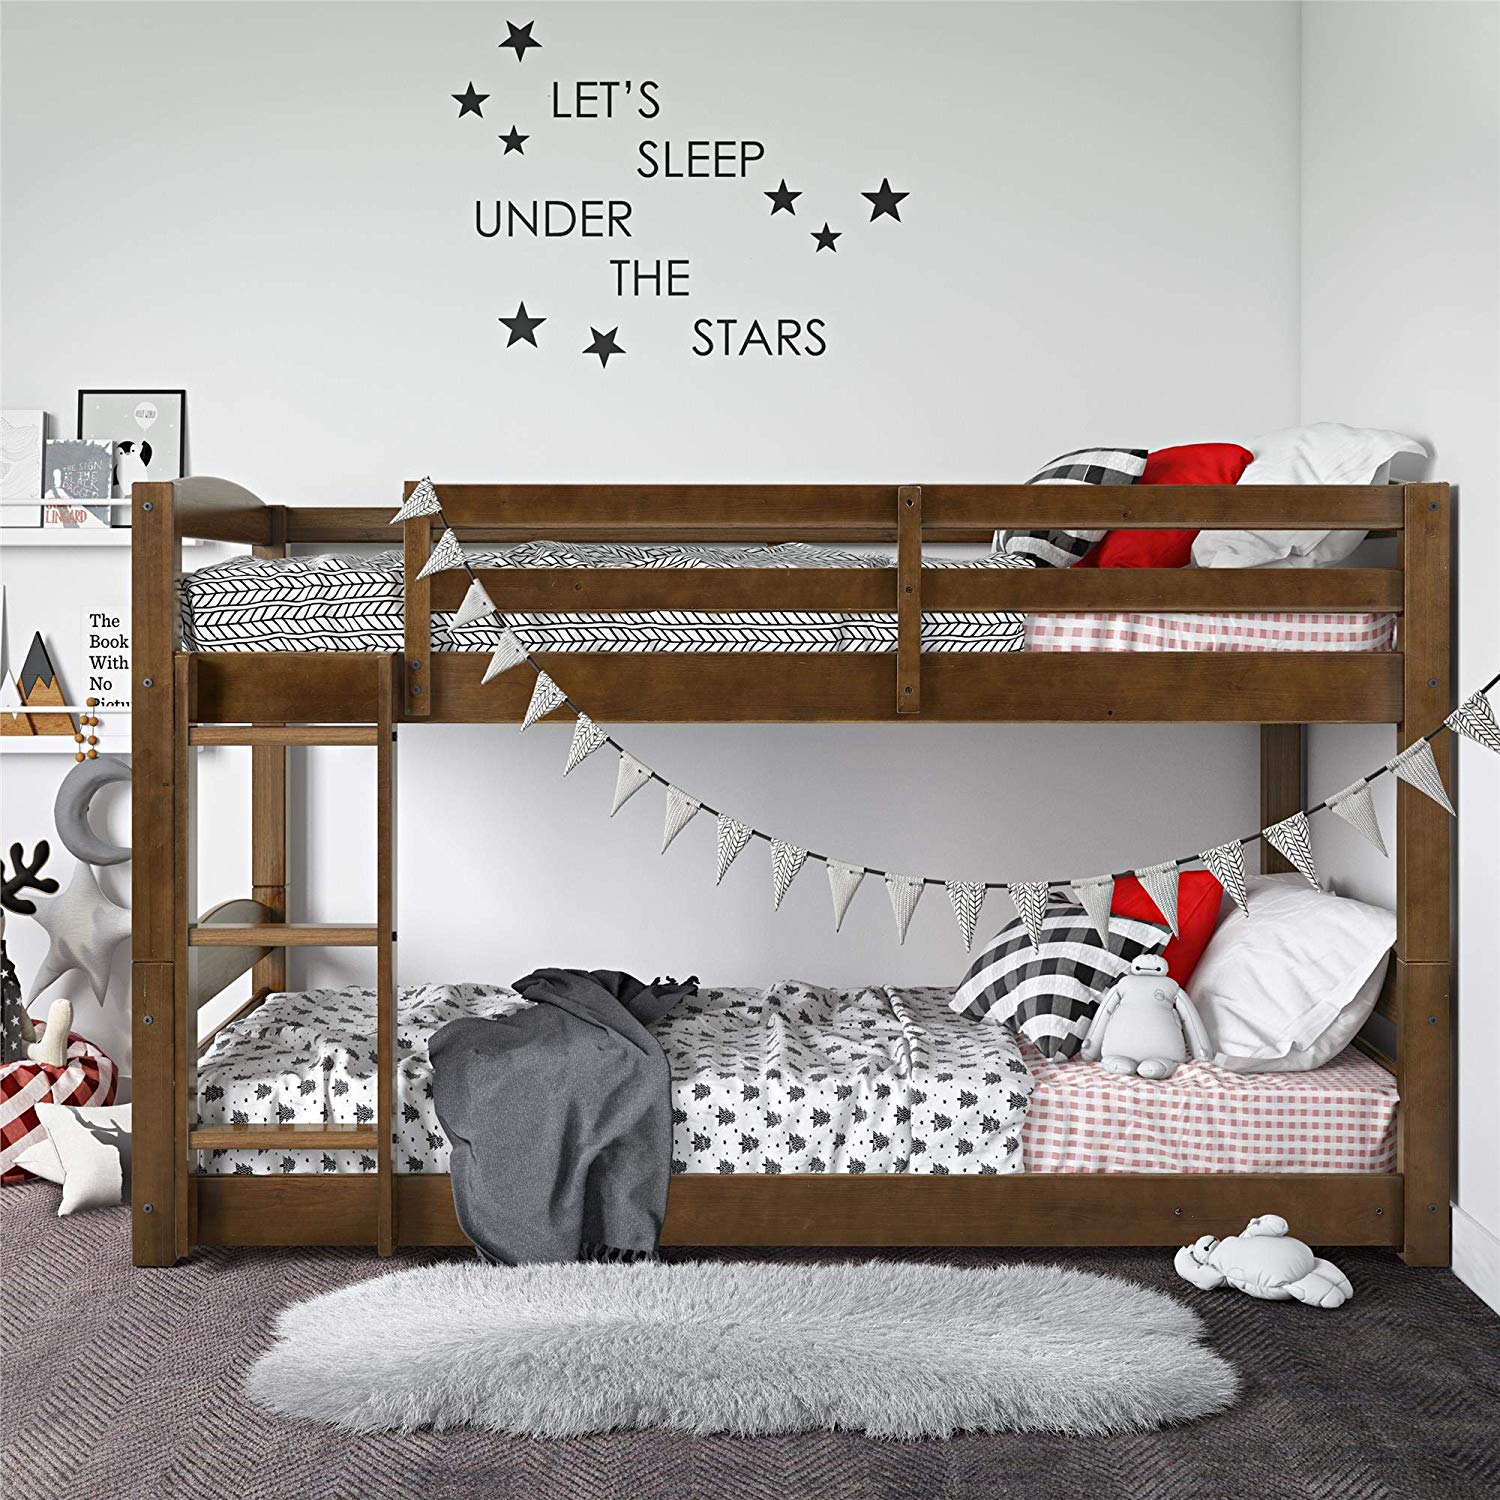 Review of Dorel Living Phoenix Solid Wood Twin over Twin Floor Bunk Beds with Ladder and Guard Rail